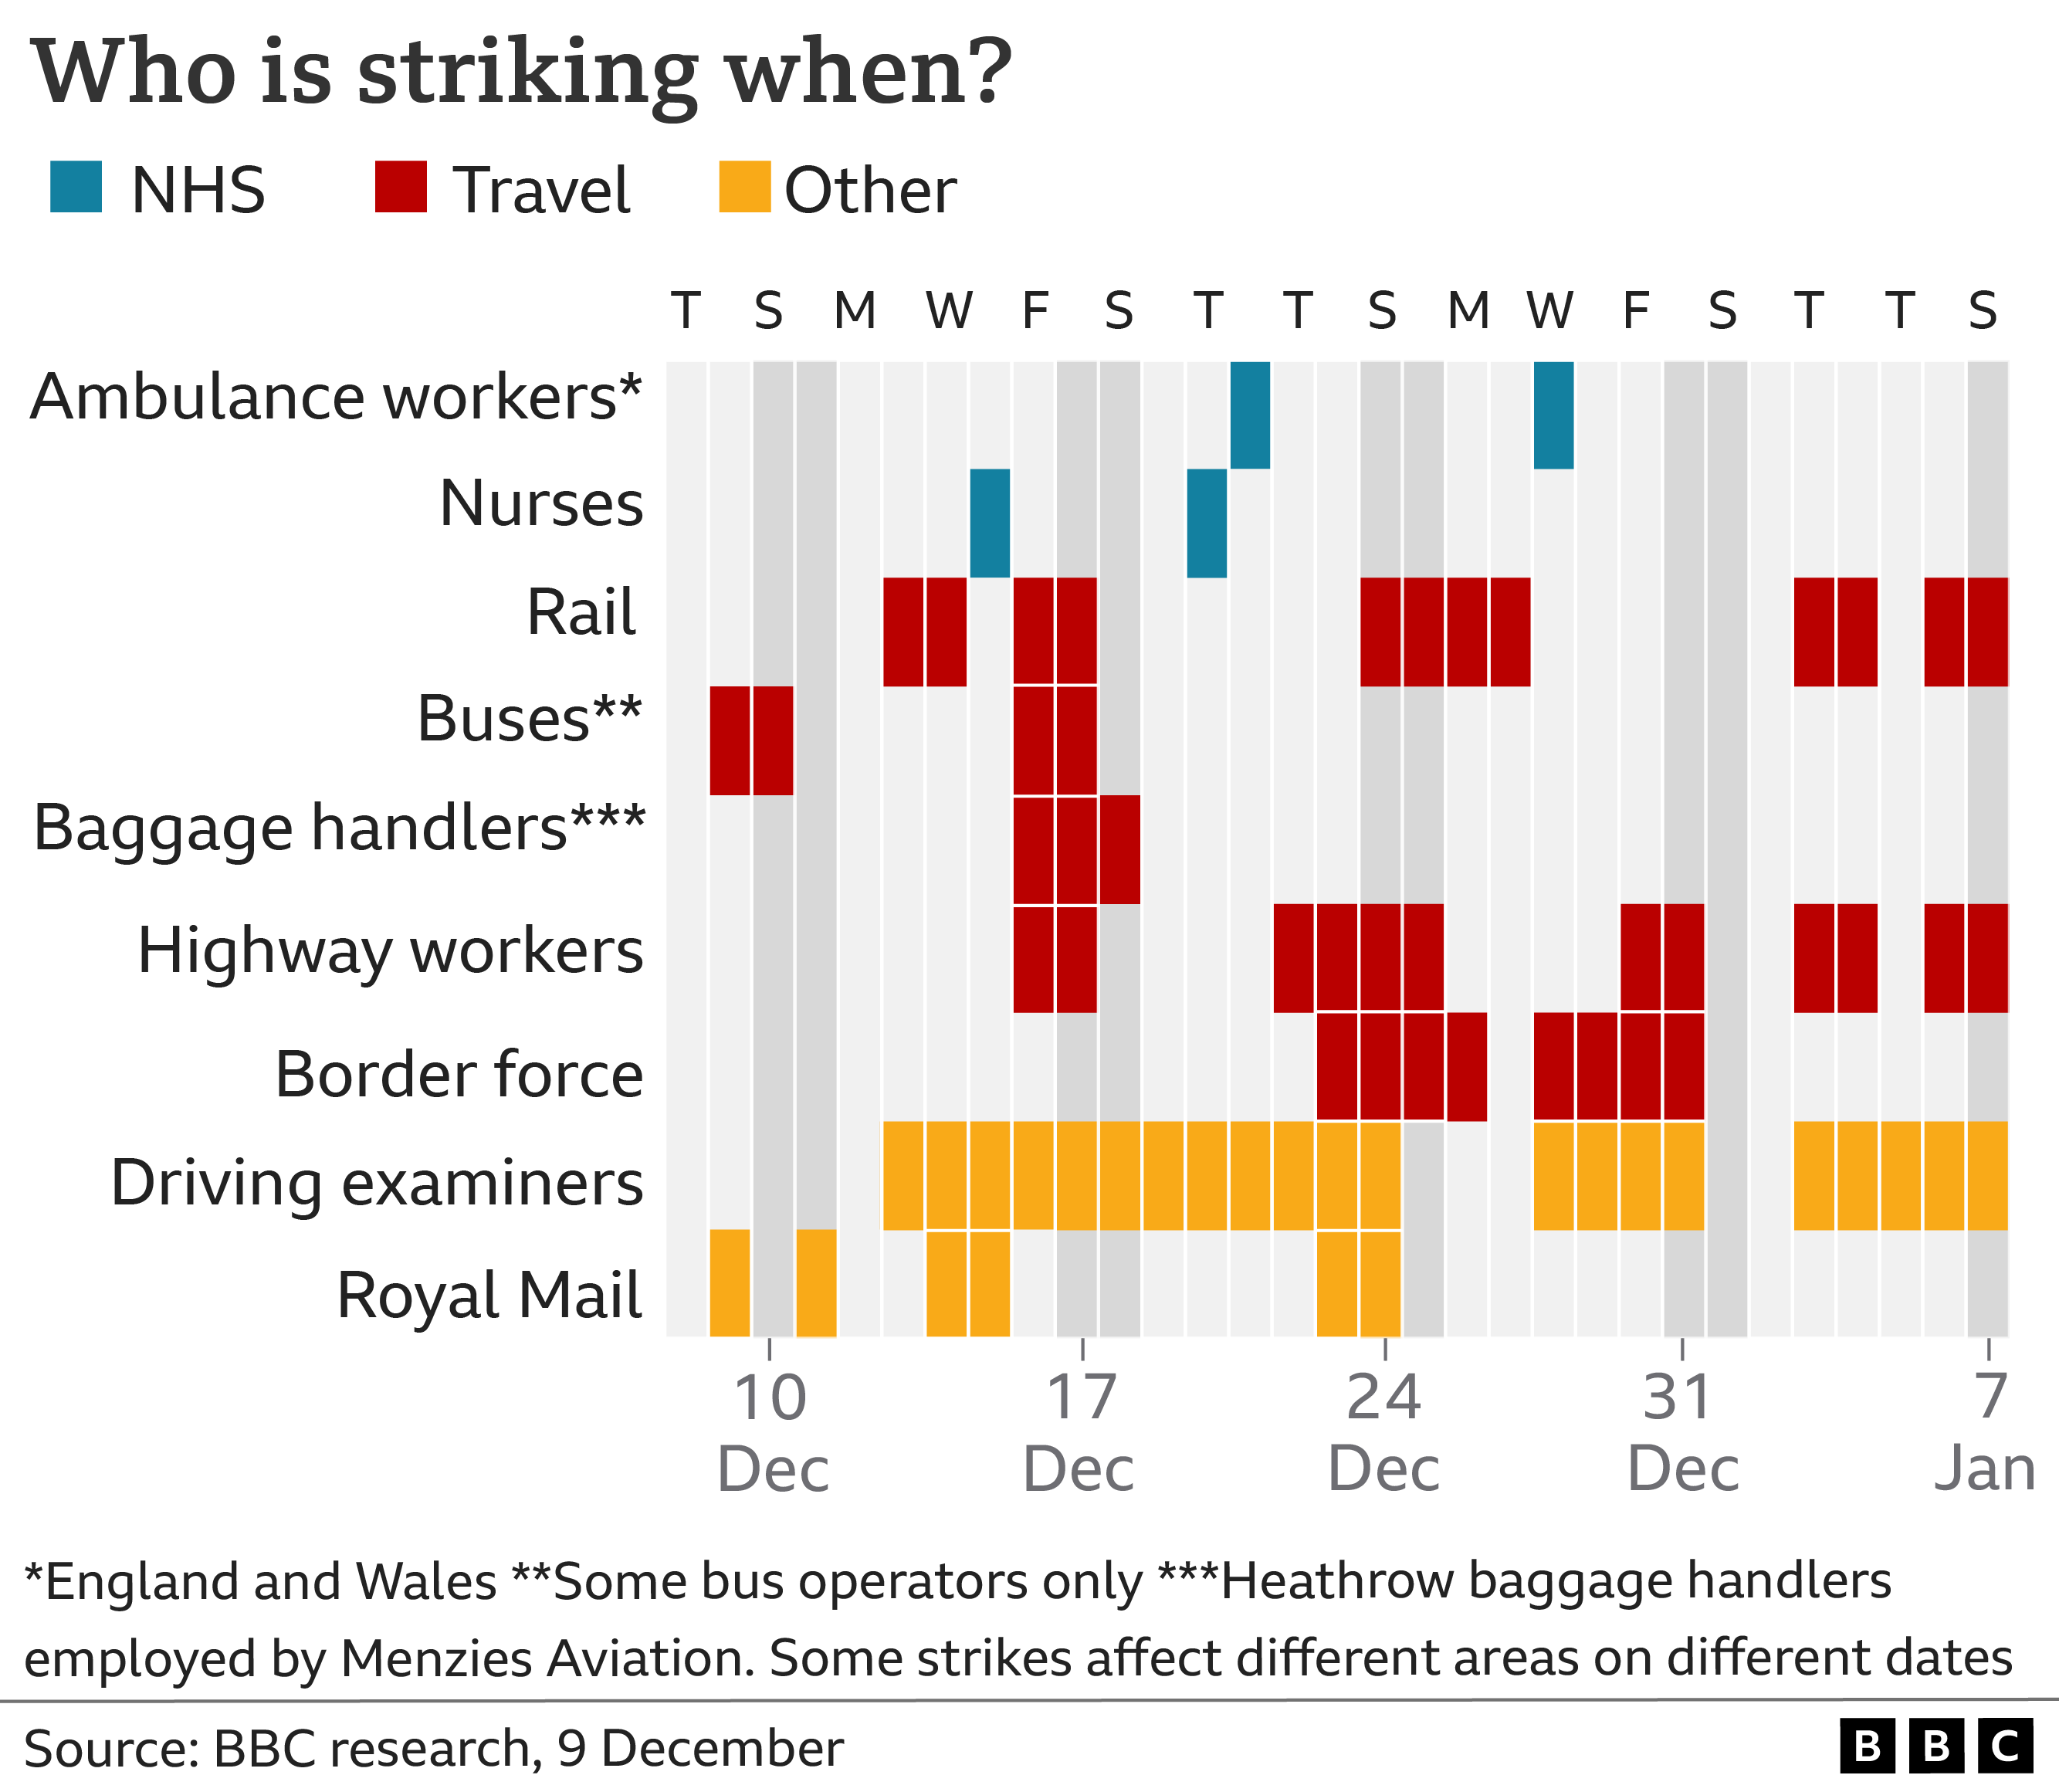 A graphic showing who is striking when (9 Dec)